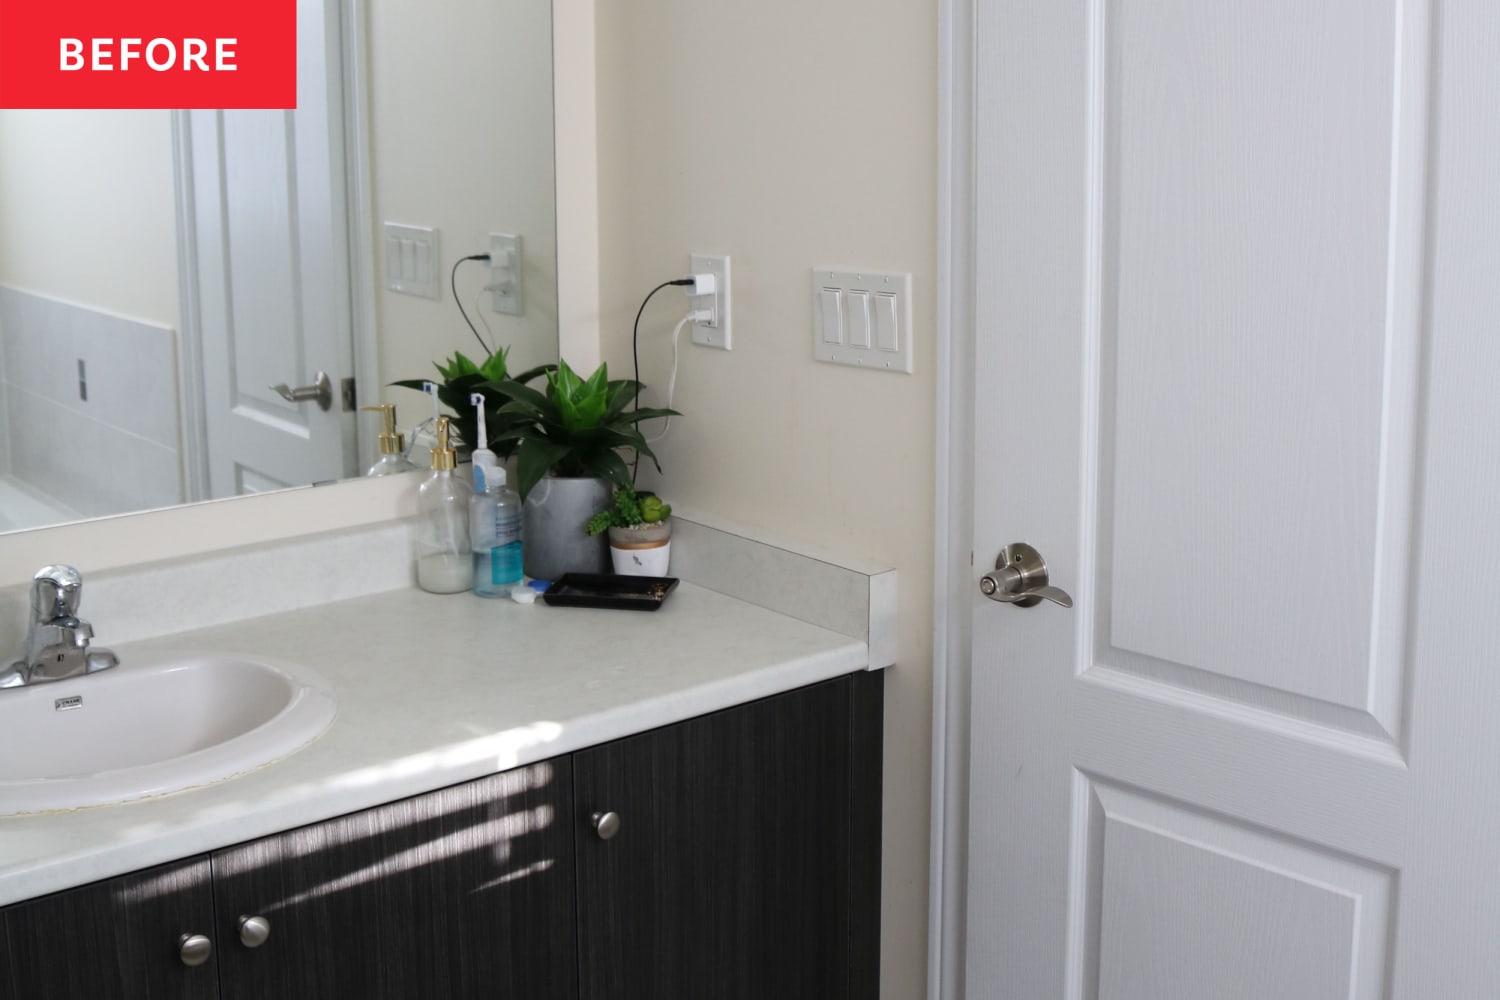 Before and After: Thanks to a $750 Redo, This Bathroom Feels “Like Being in the Rainforest”